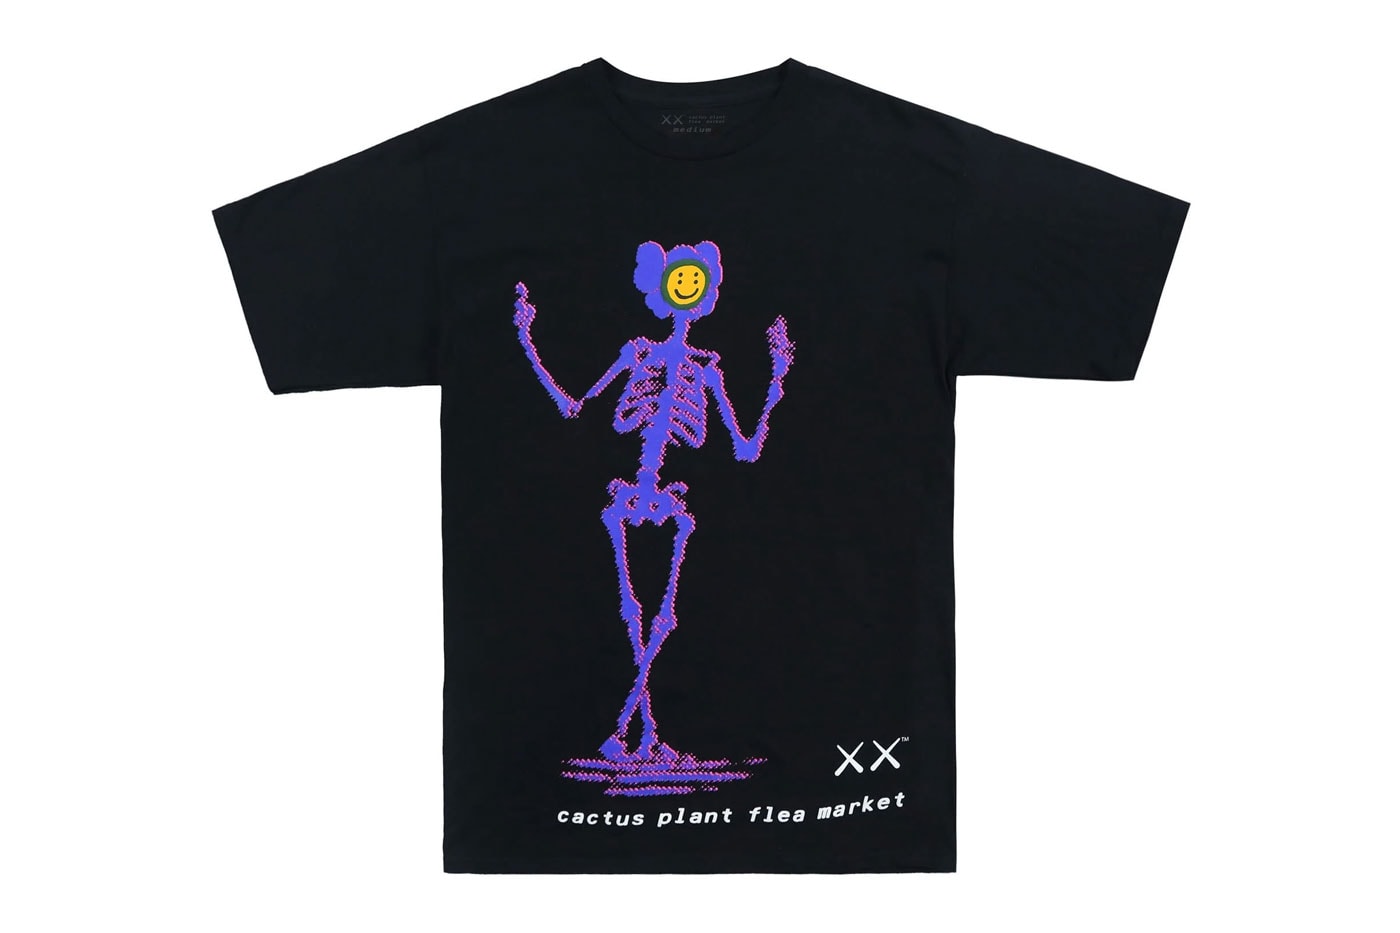 KAWS and Cactus Plant Flea Market Unveil New Halloween-themed Collaboration release information infinite archives spooky months skeleton figures pajam set reese's puffs general mills